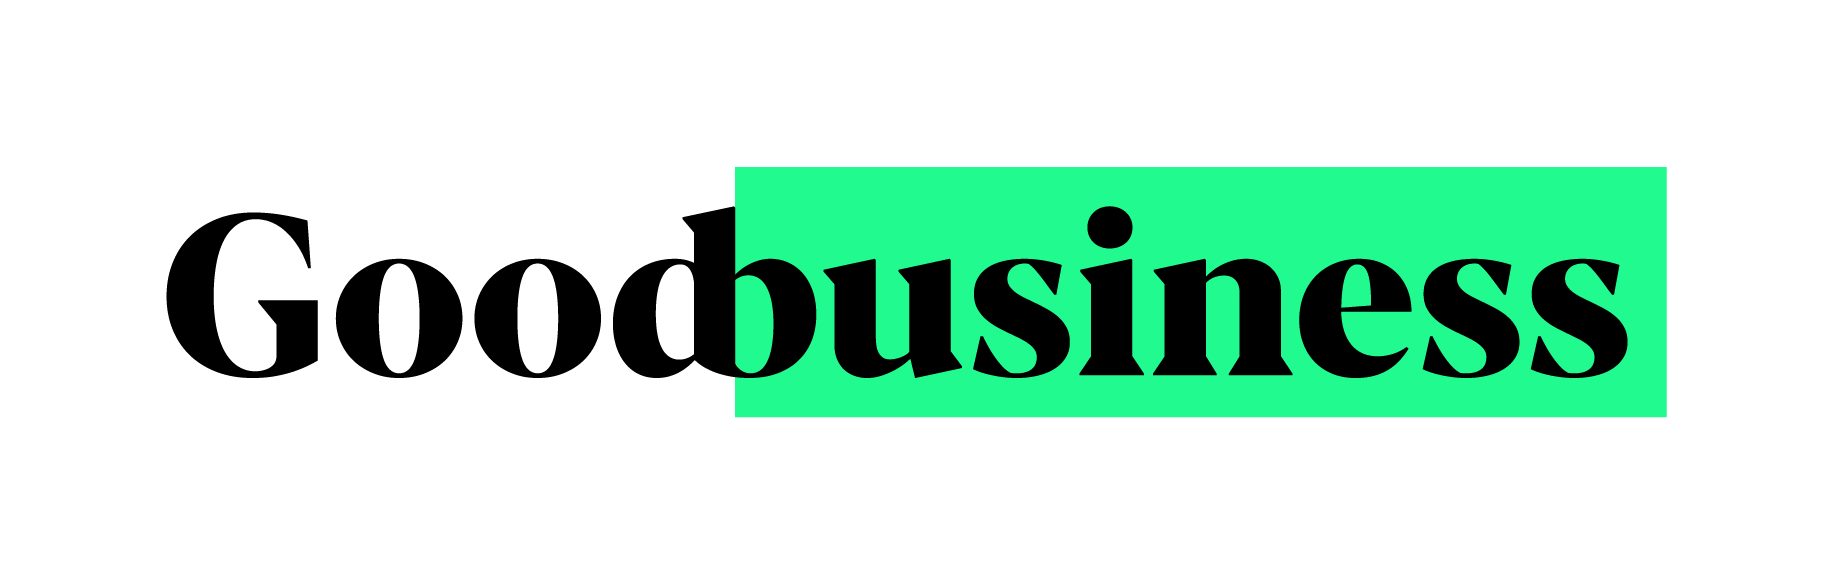 GoodBusiness Logo.png